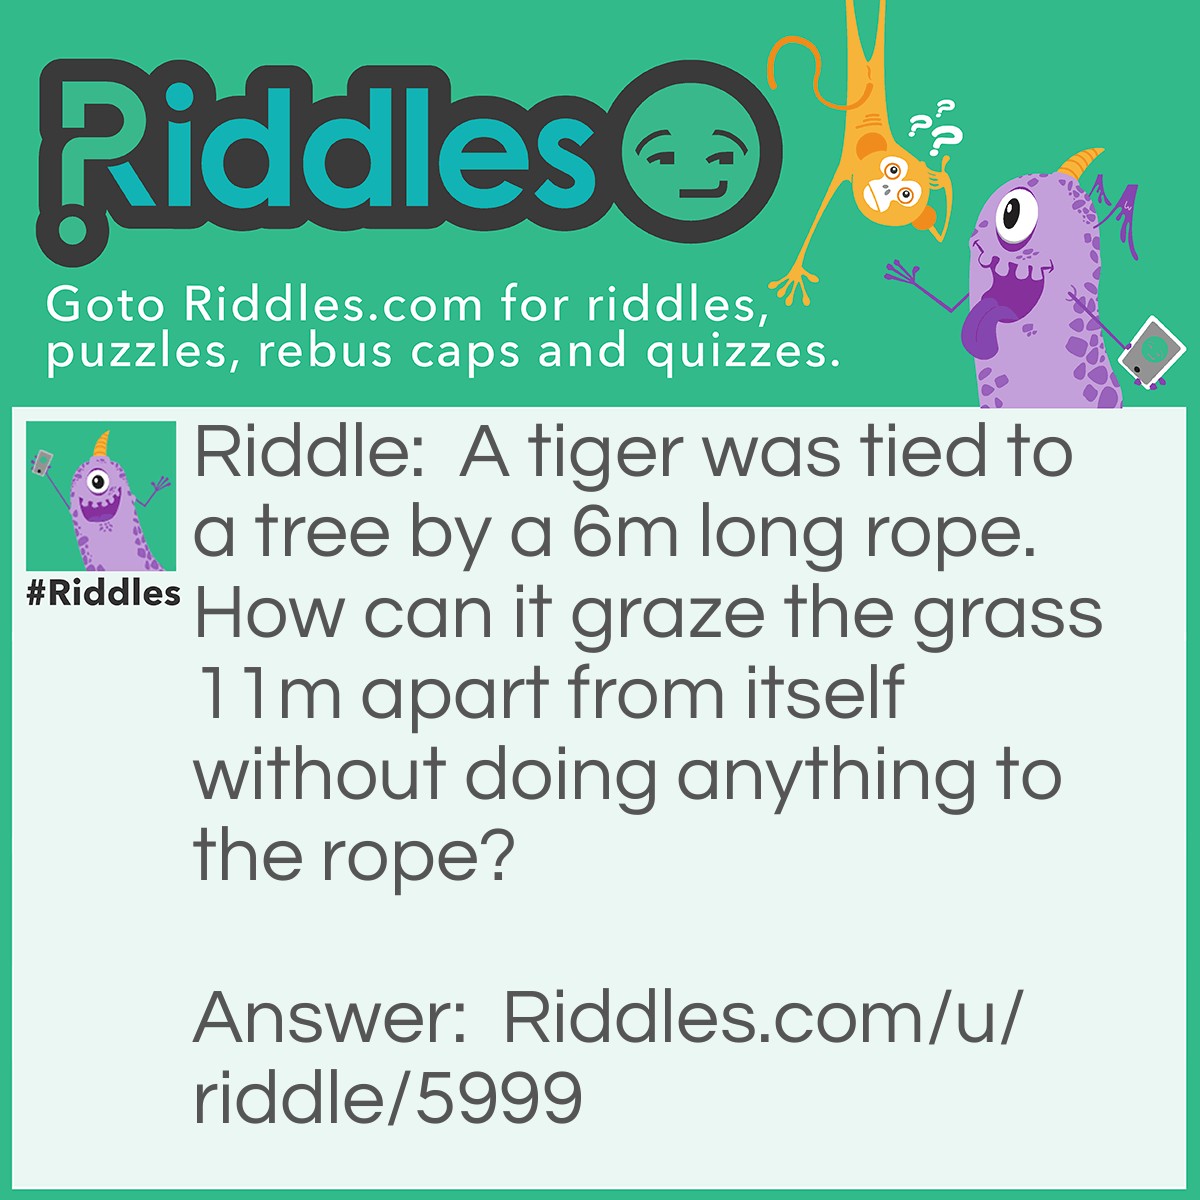 Riddle: A tiger was tied to a tree by a 6m long rope. How can it graze the grass 11m apart from itself without doing anything to the rope? Answer: You will not need to do anything since tigers are carnivores and do not eat grass.